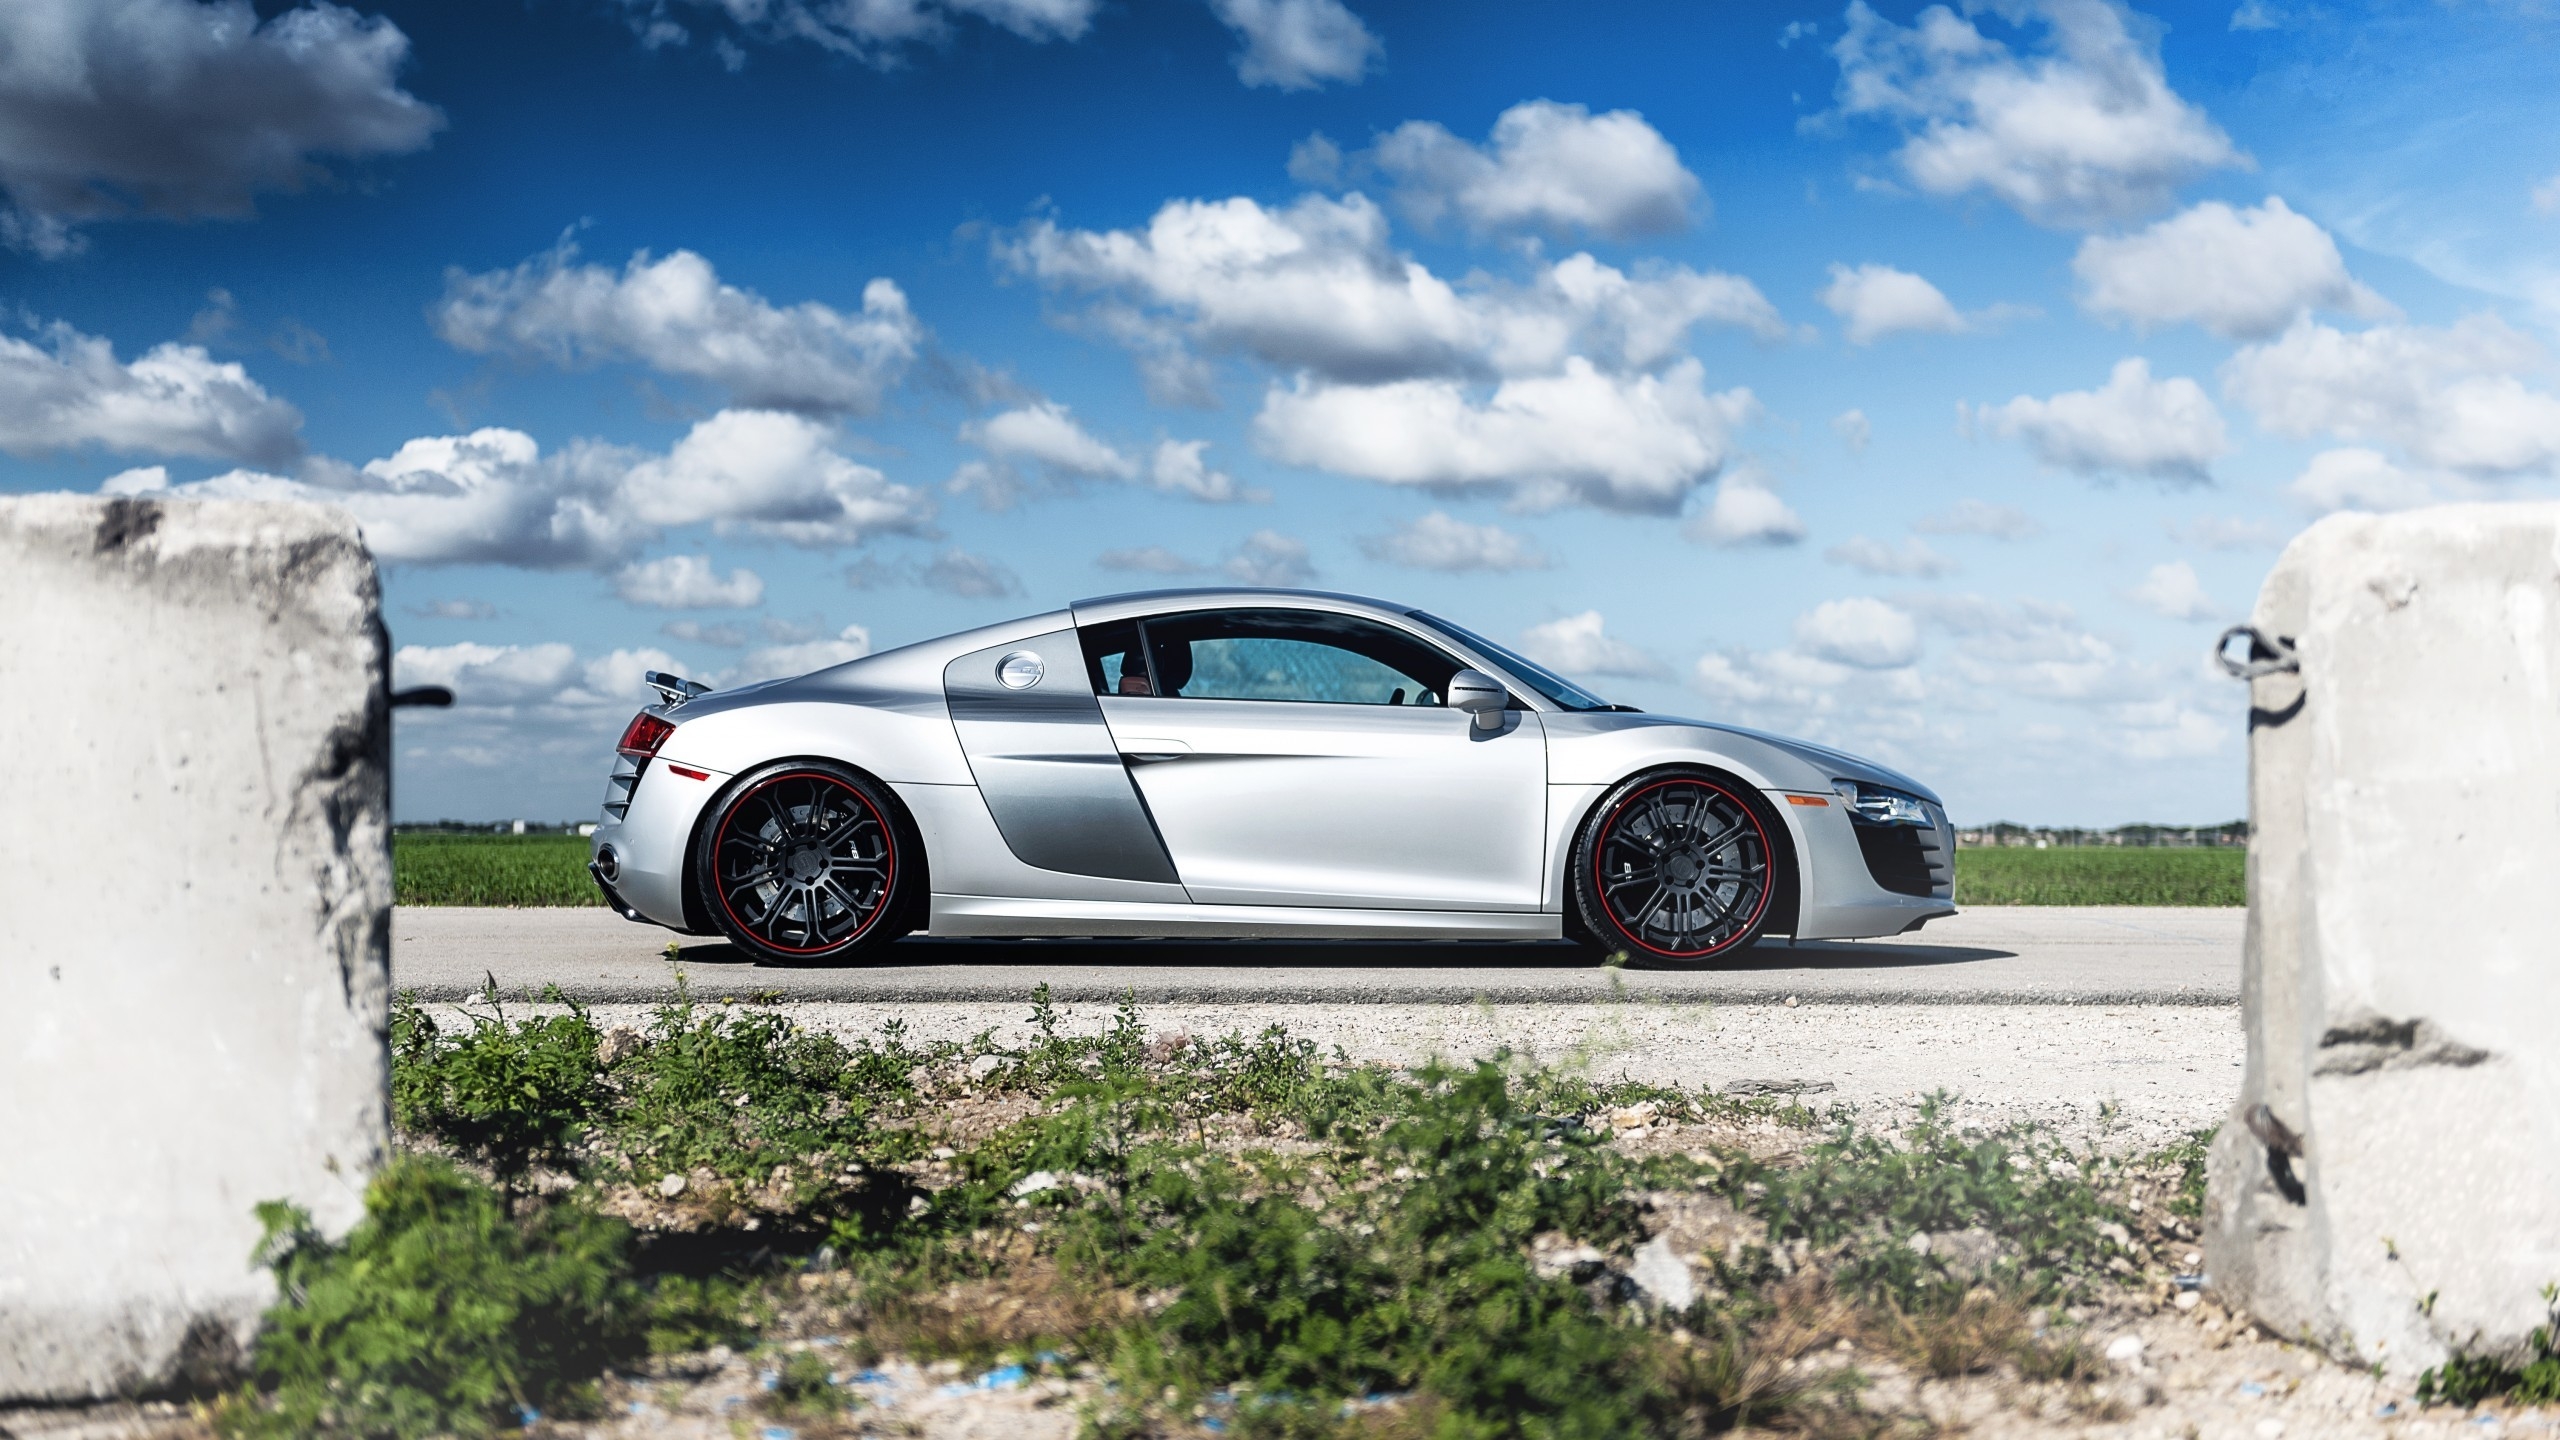 Gorgeous Grey Audi R8 for 2560x1440 HDTV resolution